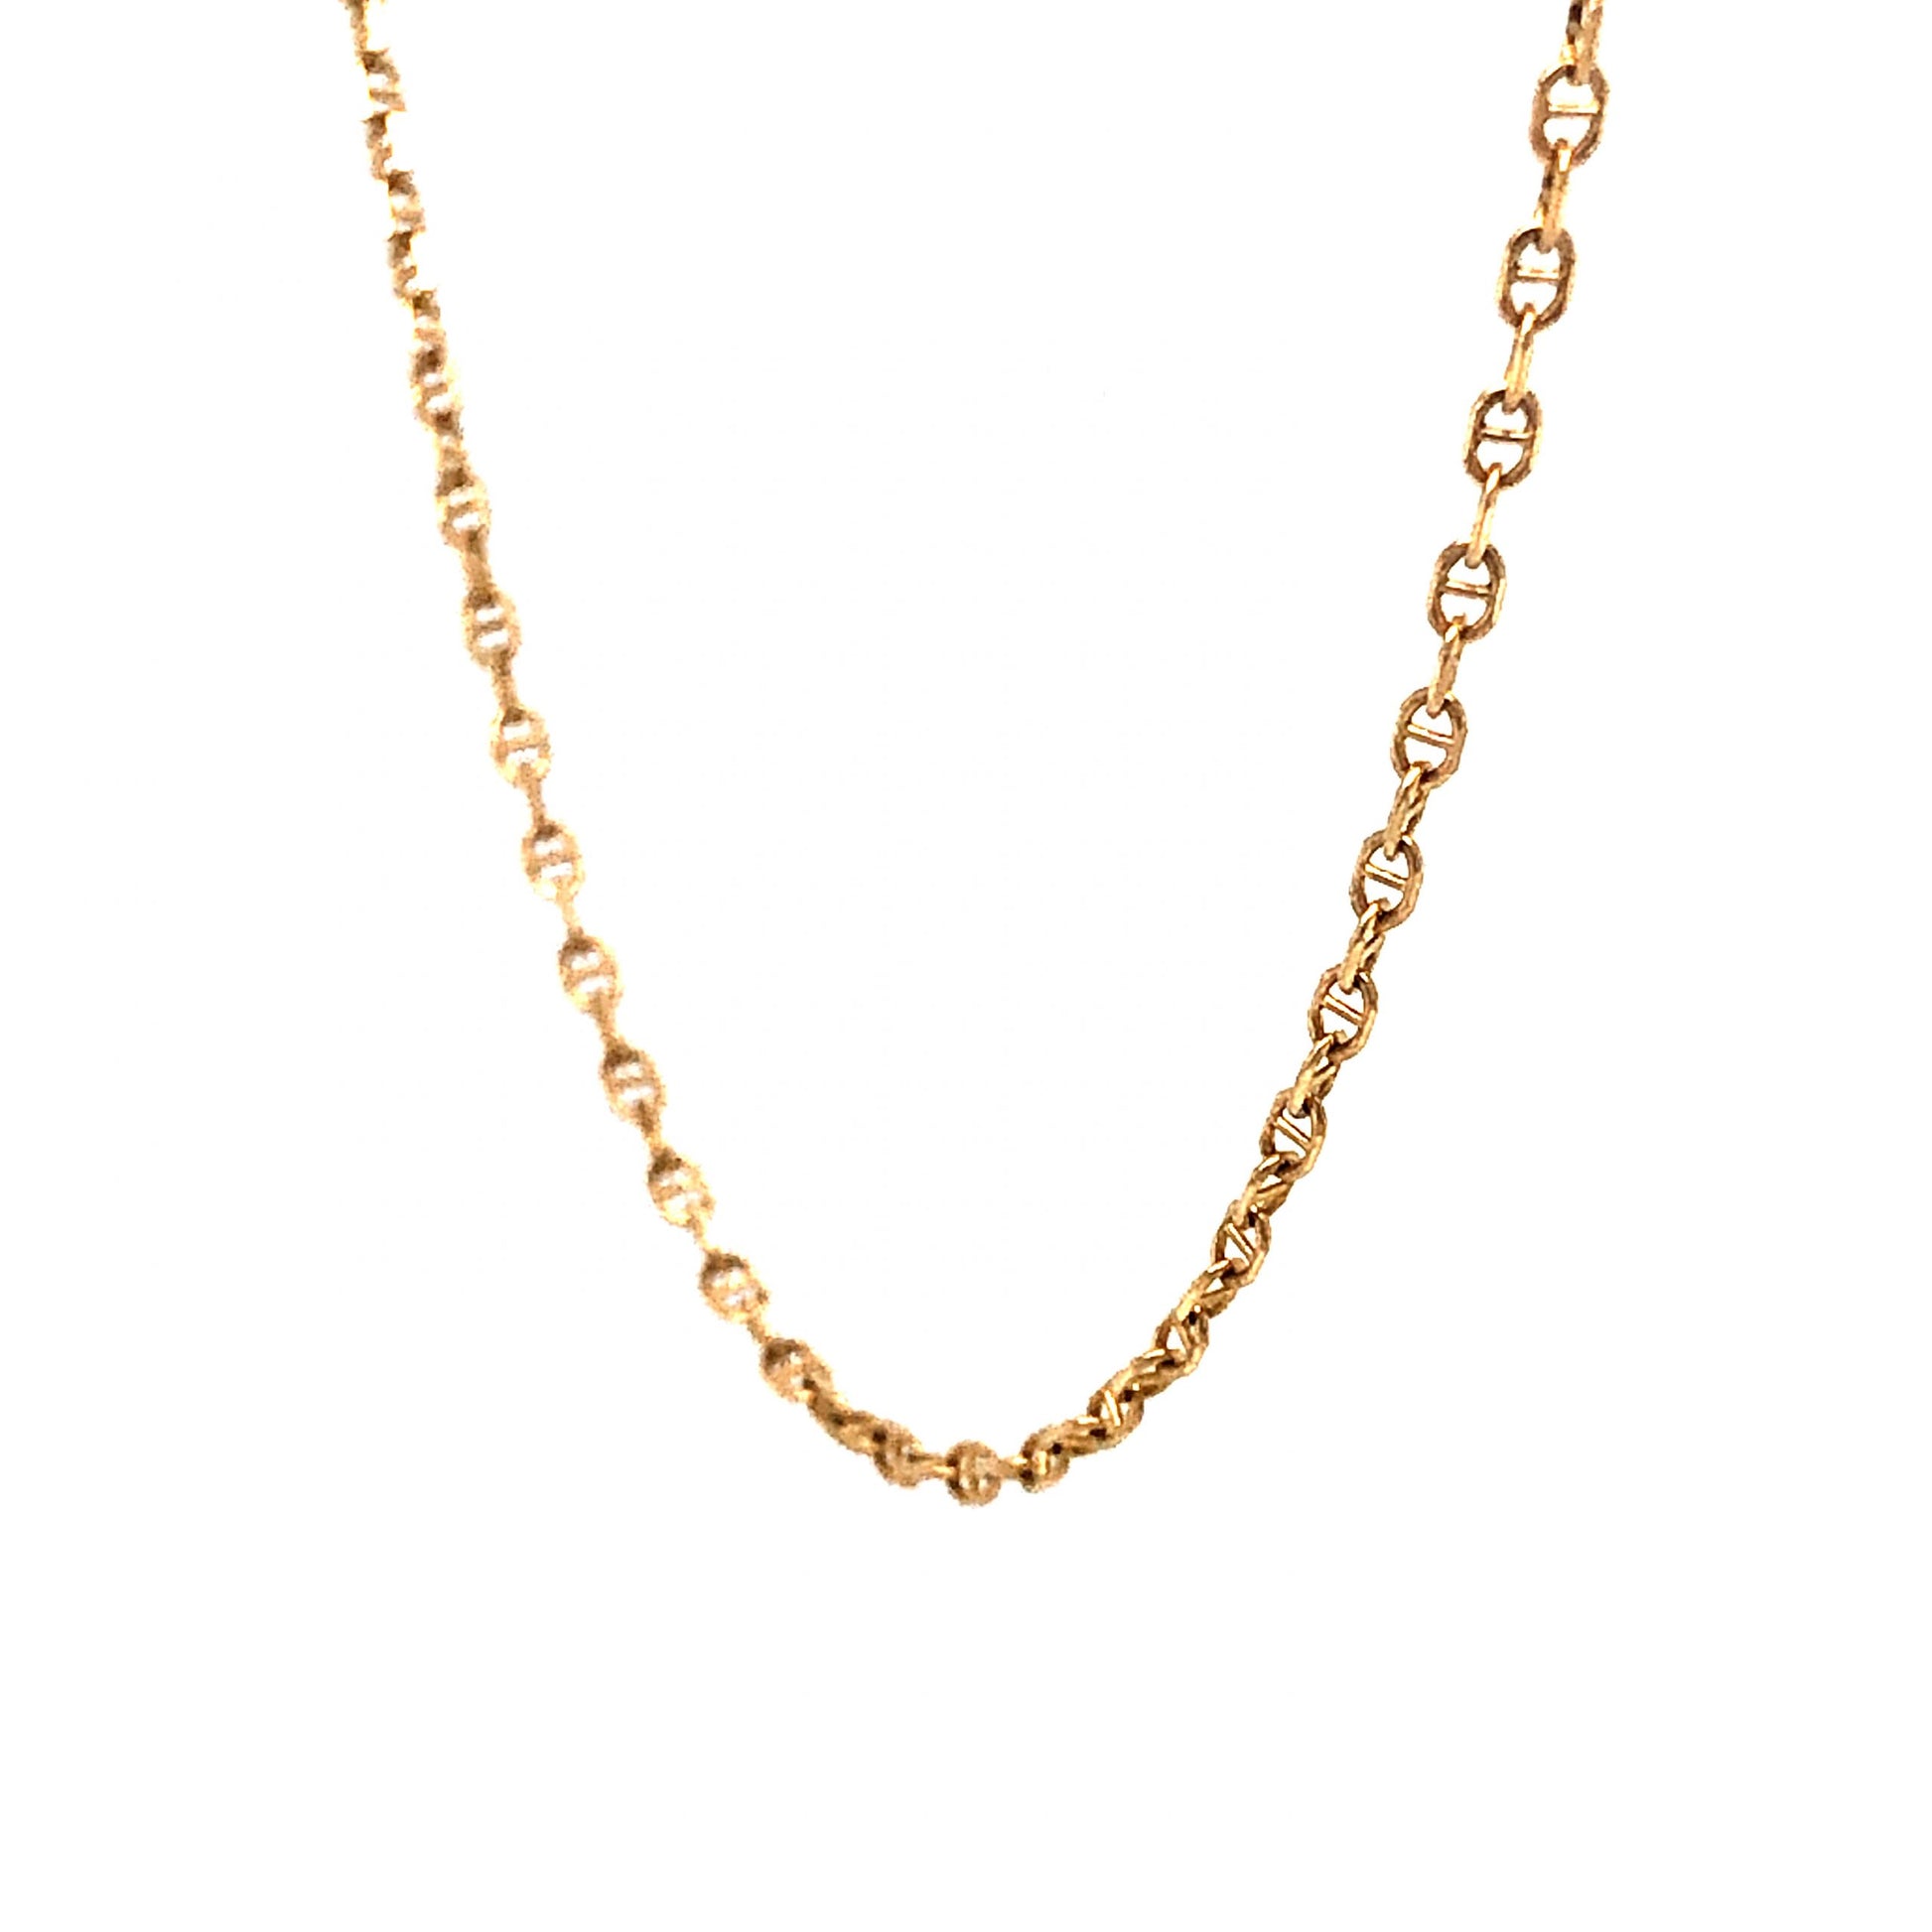 16 Inch Pendant Chain in 14k Yellow GoldComposition: 14 Karat Yellow GoldTotal Gram Weight: 1.6 gInscription: 14 KT ITALY